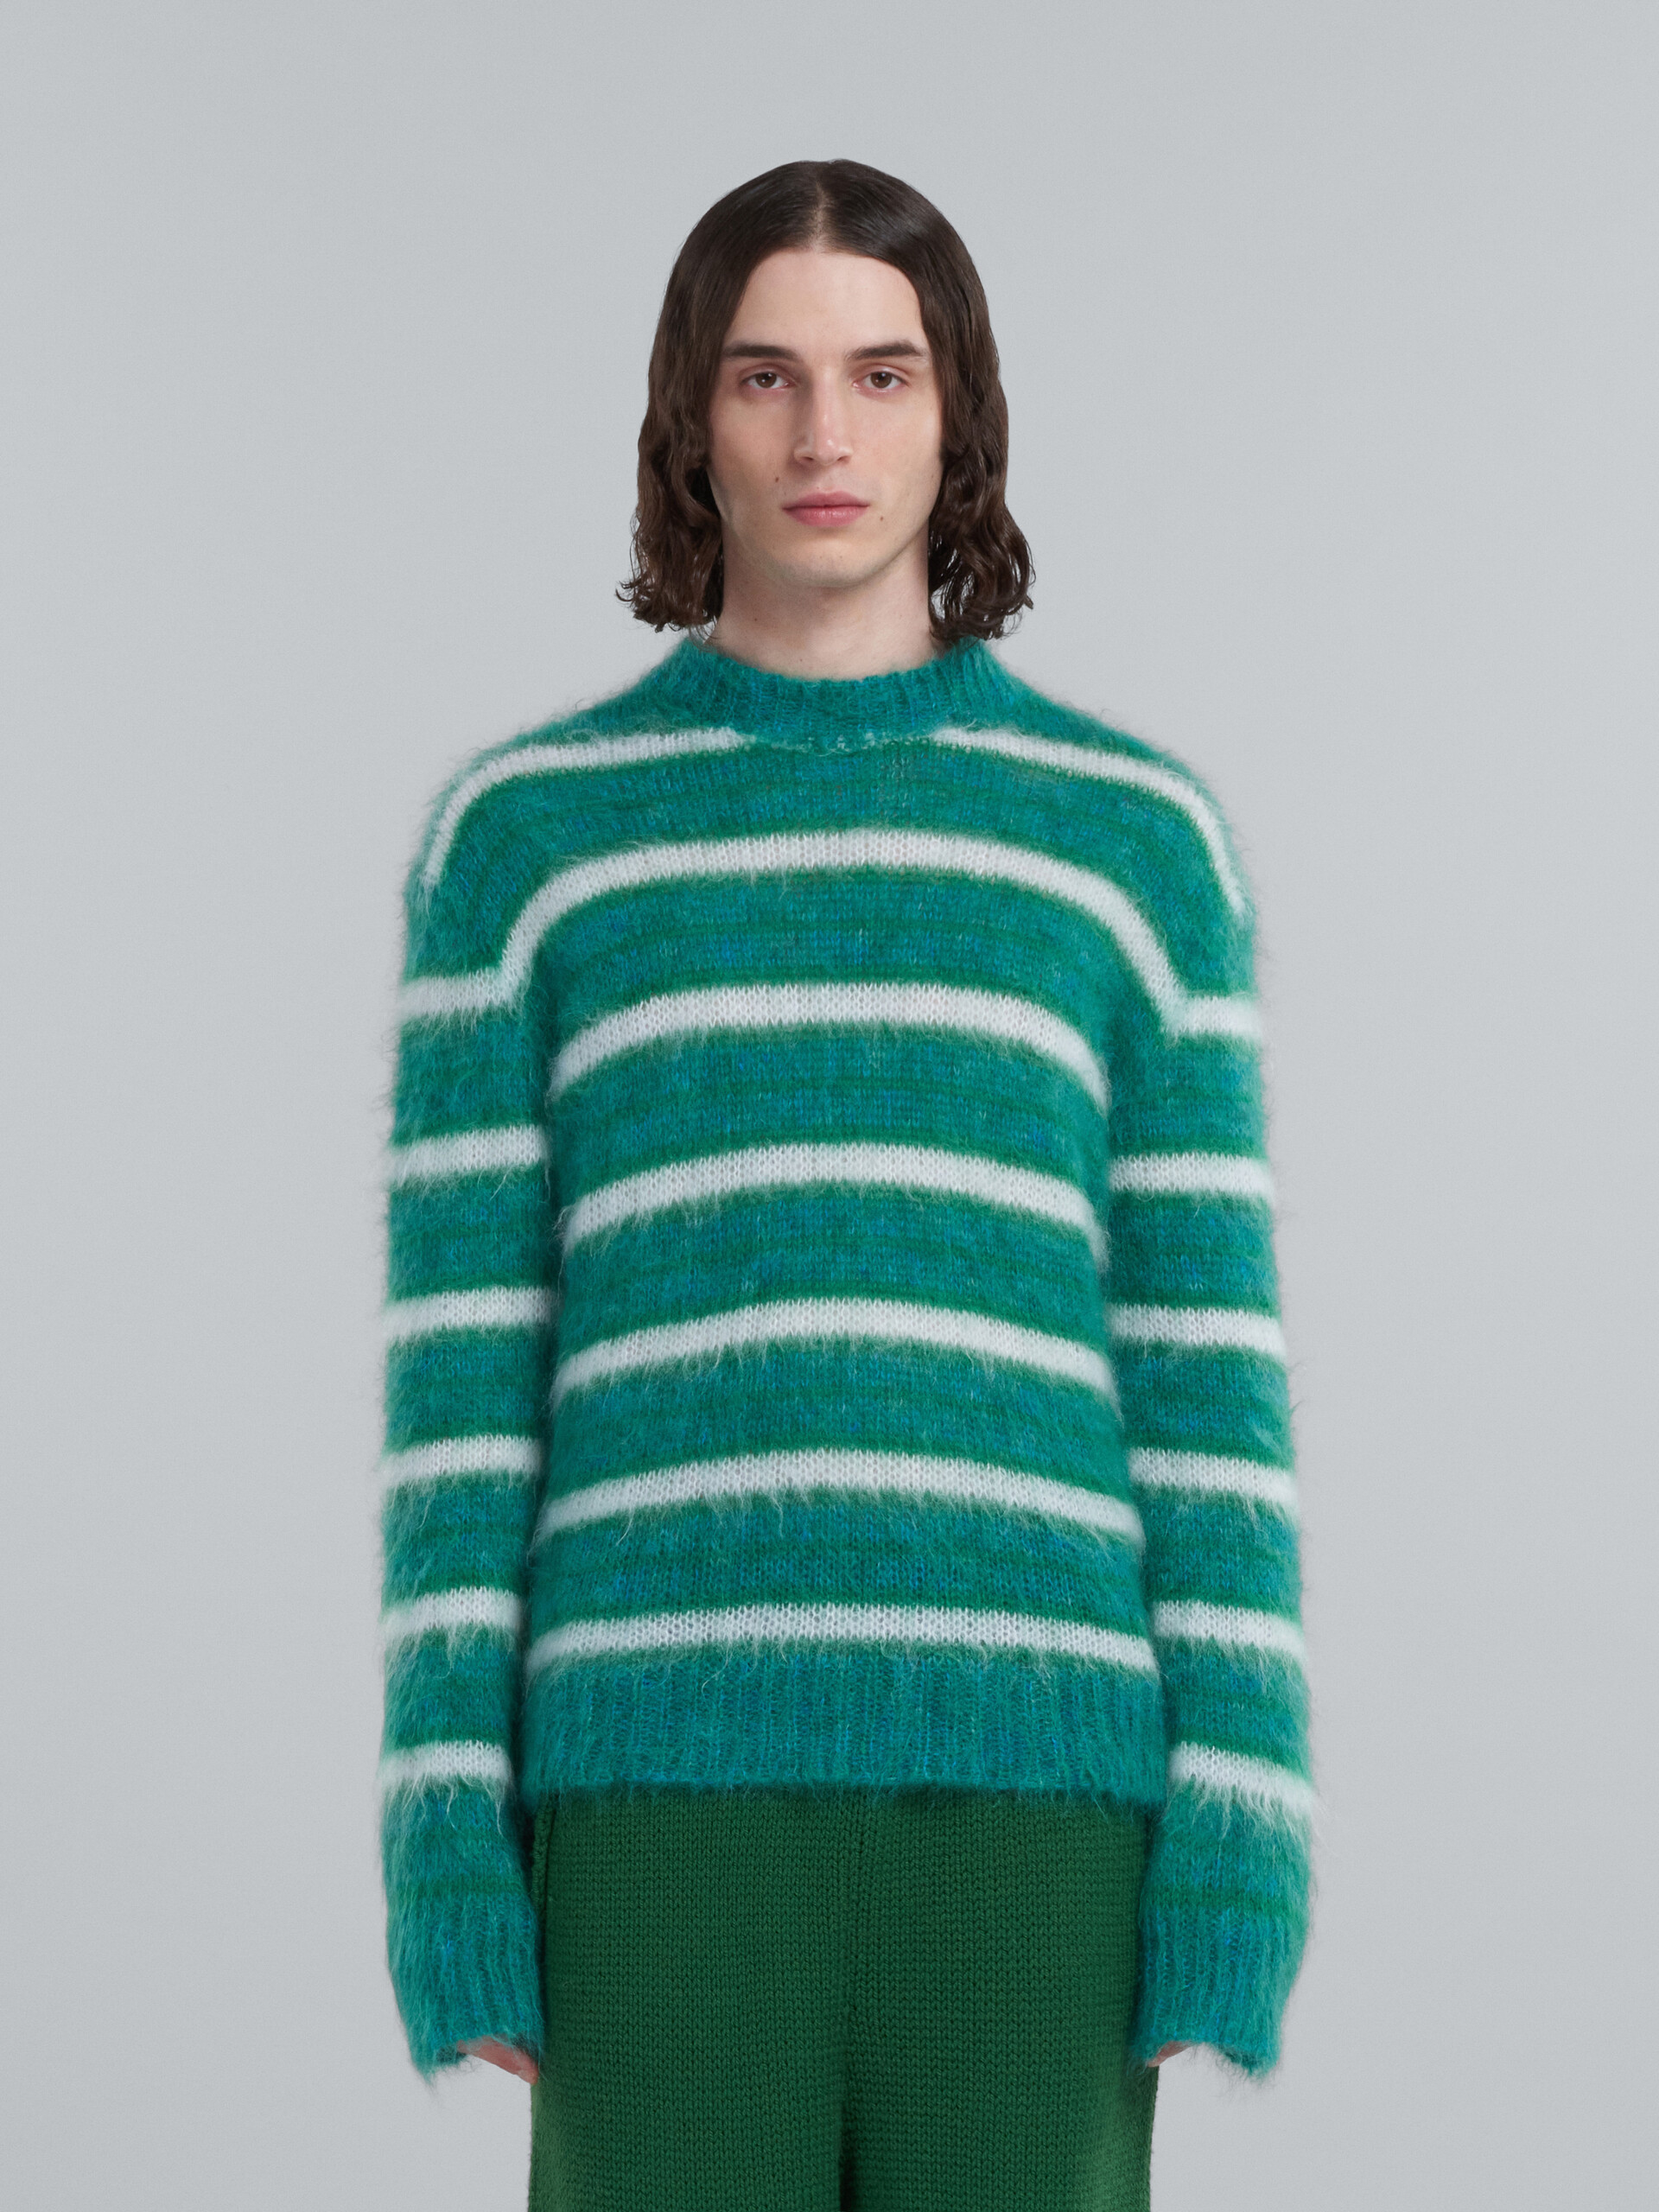 Turquoise striped mohair sweater - Pullovers - Image 2